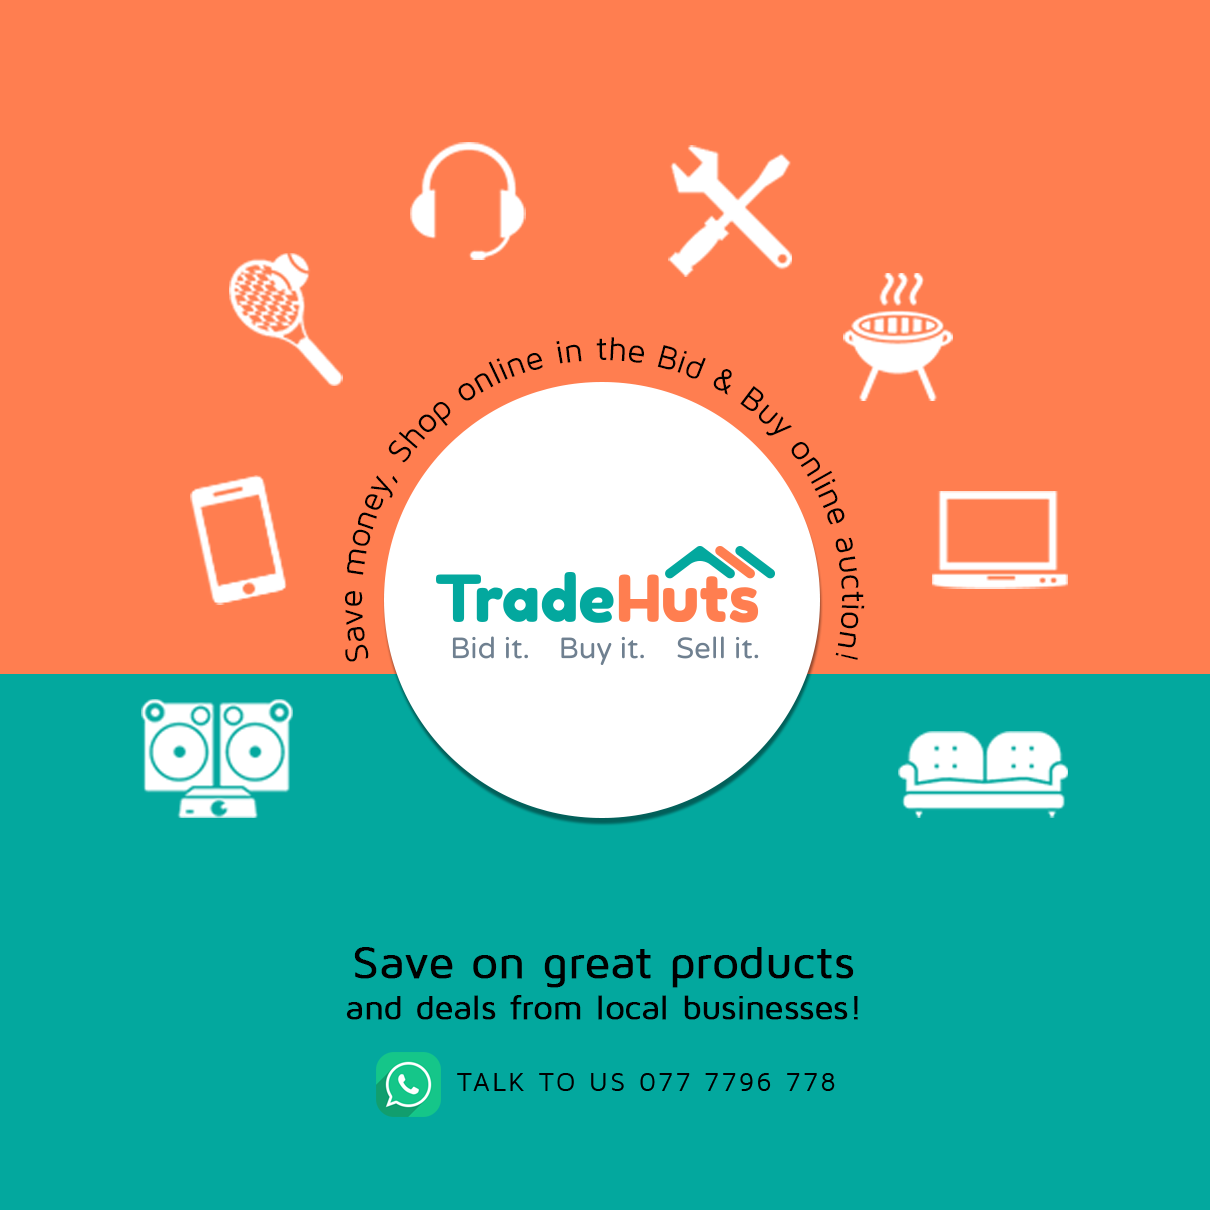 The first online marketplace in Sri Lanka that allows bidding. Image credit: Tradehuts/Facebook